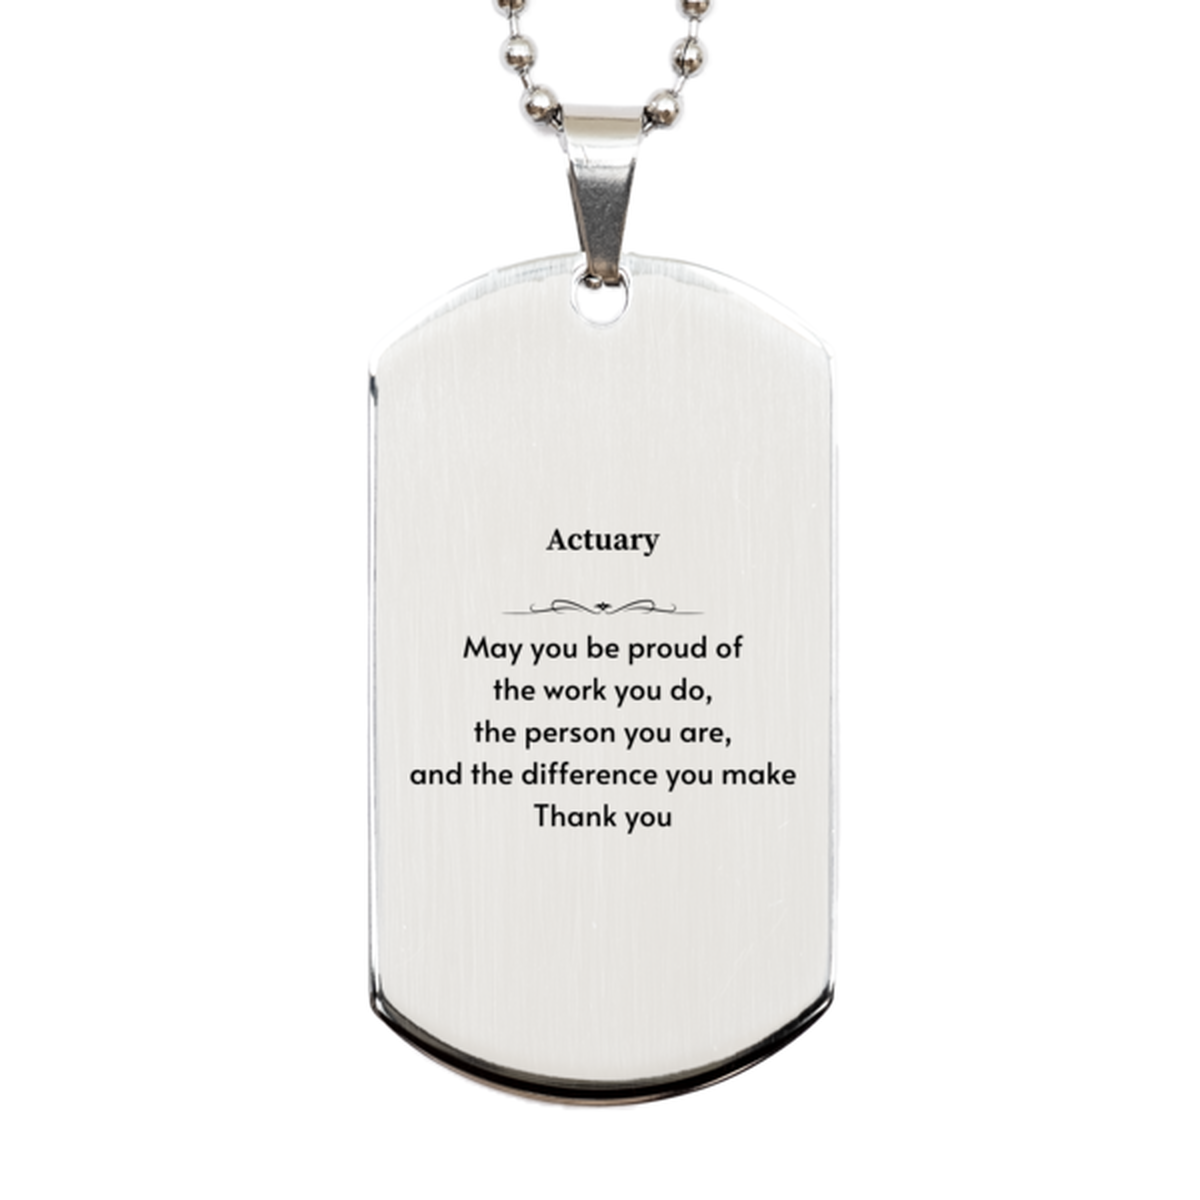 Heartwarming Silver Dog Tag Retirement Coworkers Gifts for Actuary, Actuary May You be proud of the work you do, the person you are Gifts for Boss Men Women Friends